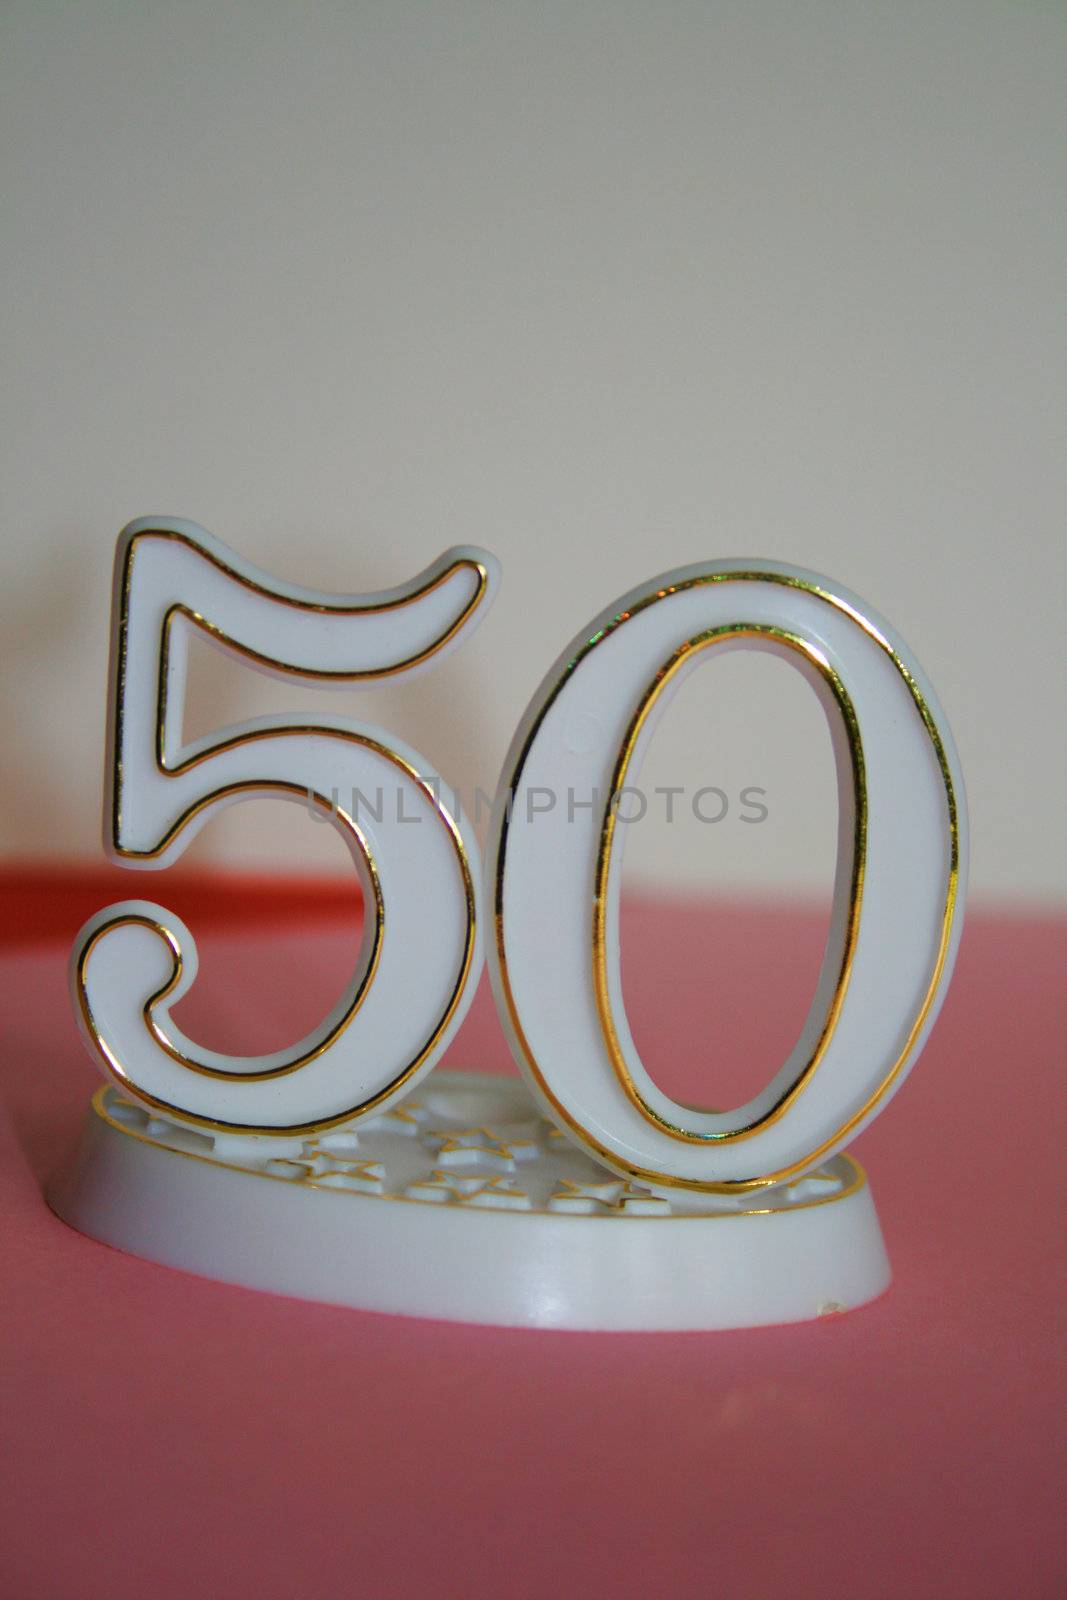 50th occasion sign over pink and white